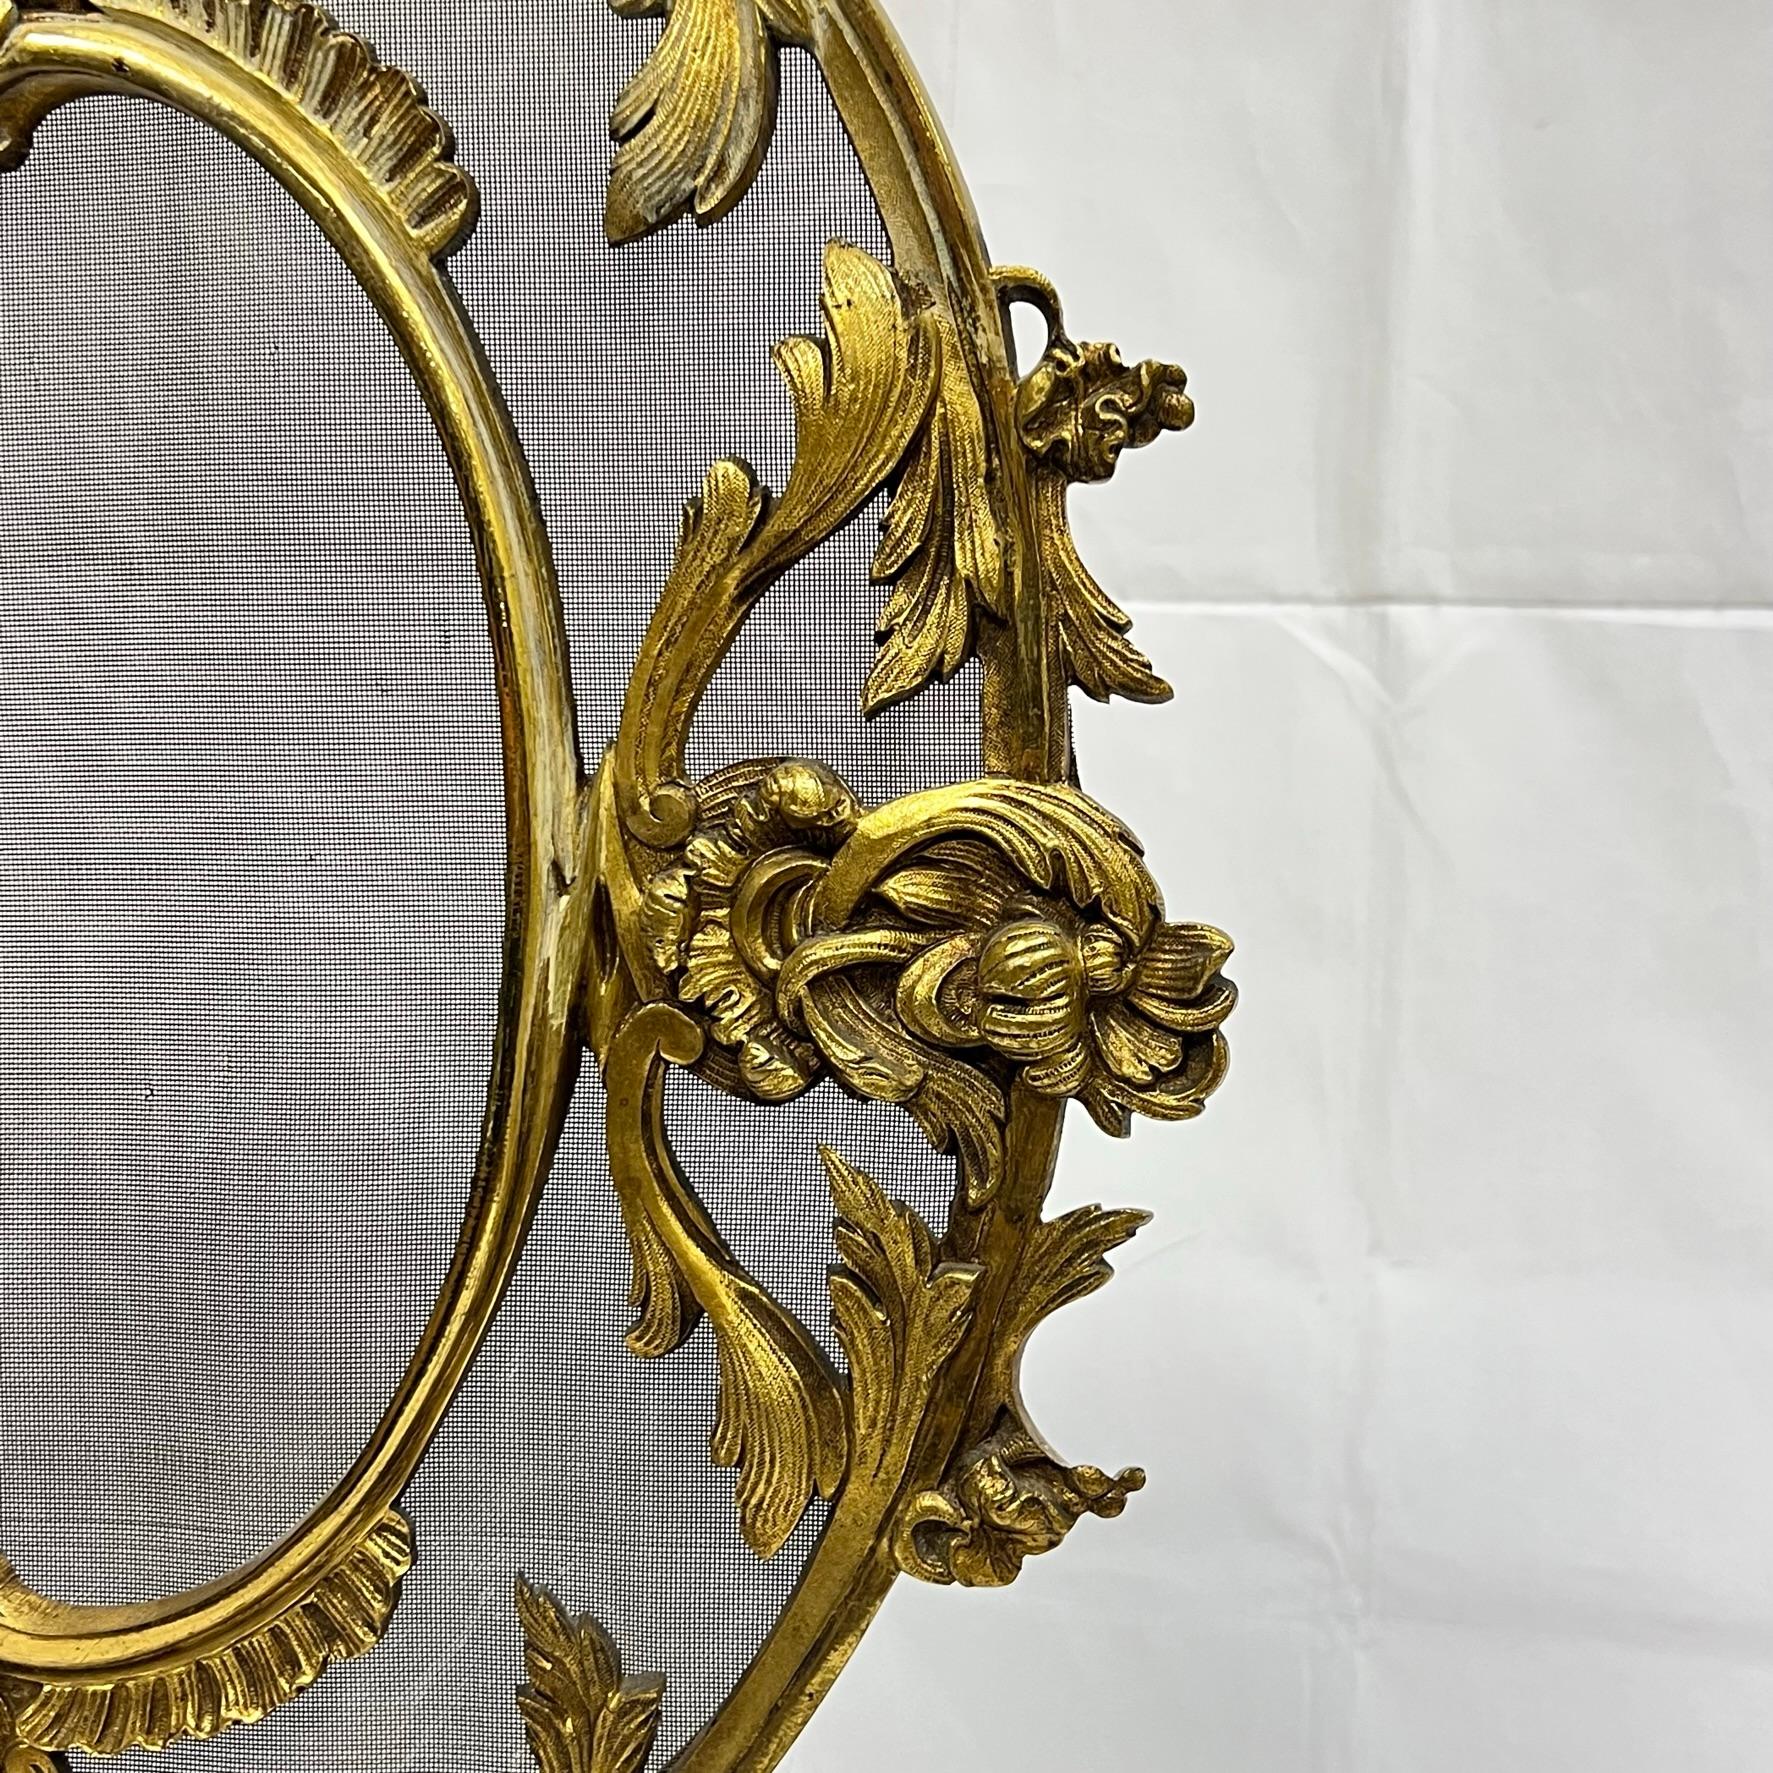 19th Century French Gilt Bronze Fireplace Screen in French Louis XV / XVI Style For Sale 1